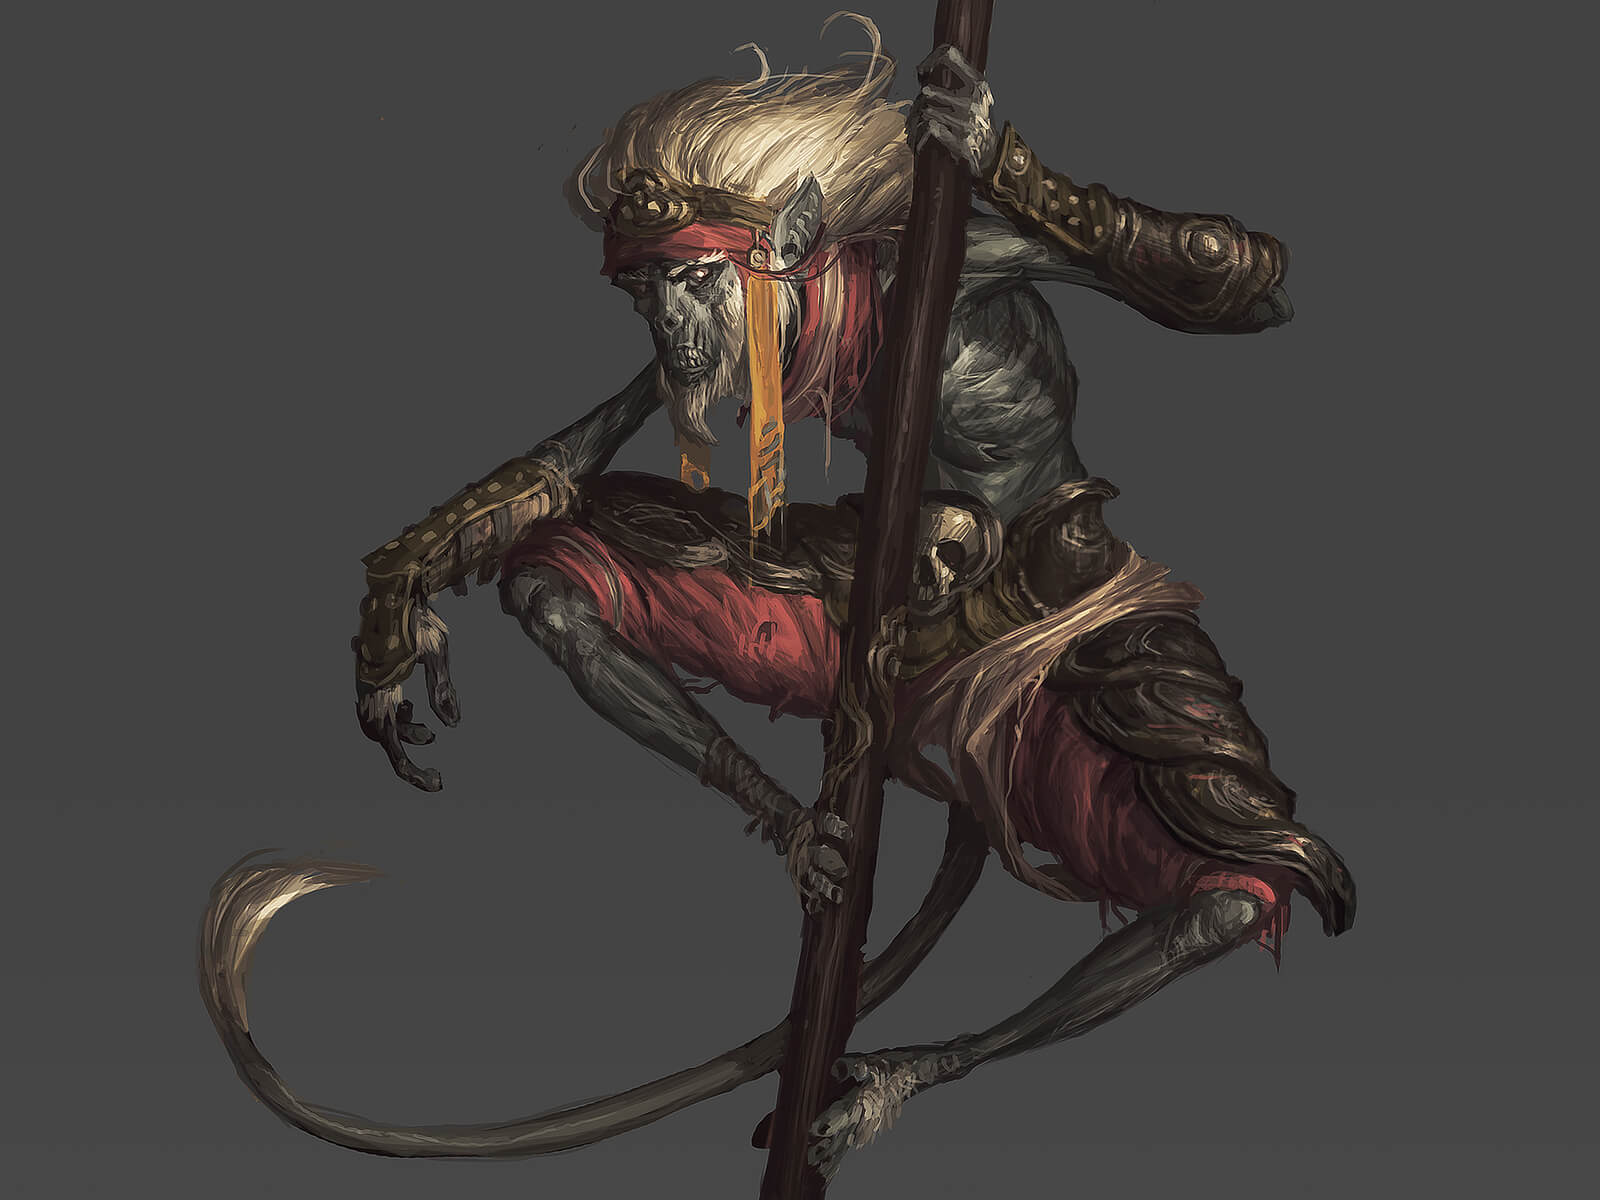 A desiccated or undead monkey with white hair balances on a tall wooden staff while dressed in ancient warrior garb.